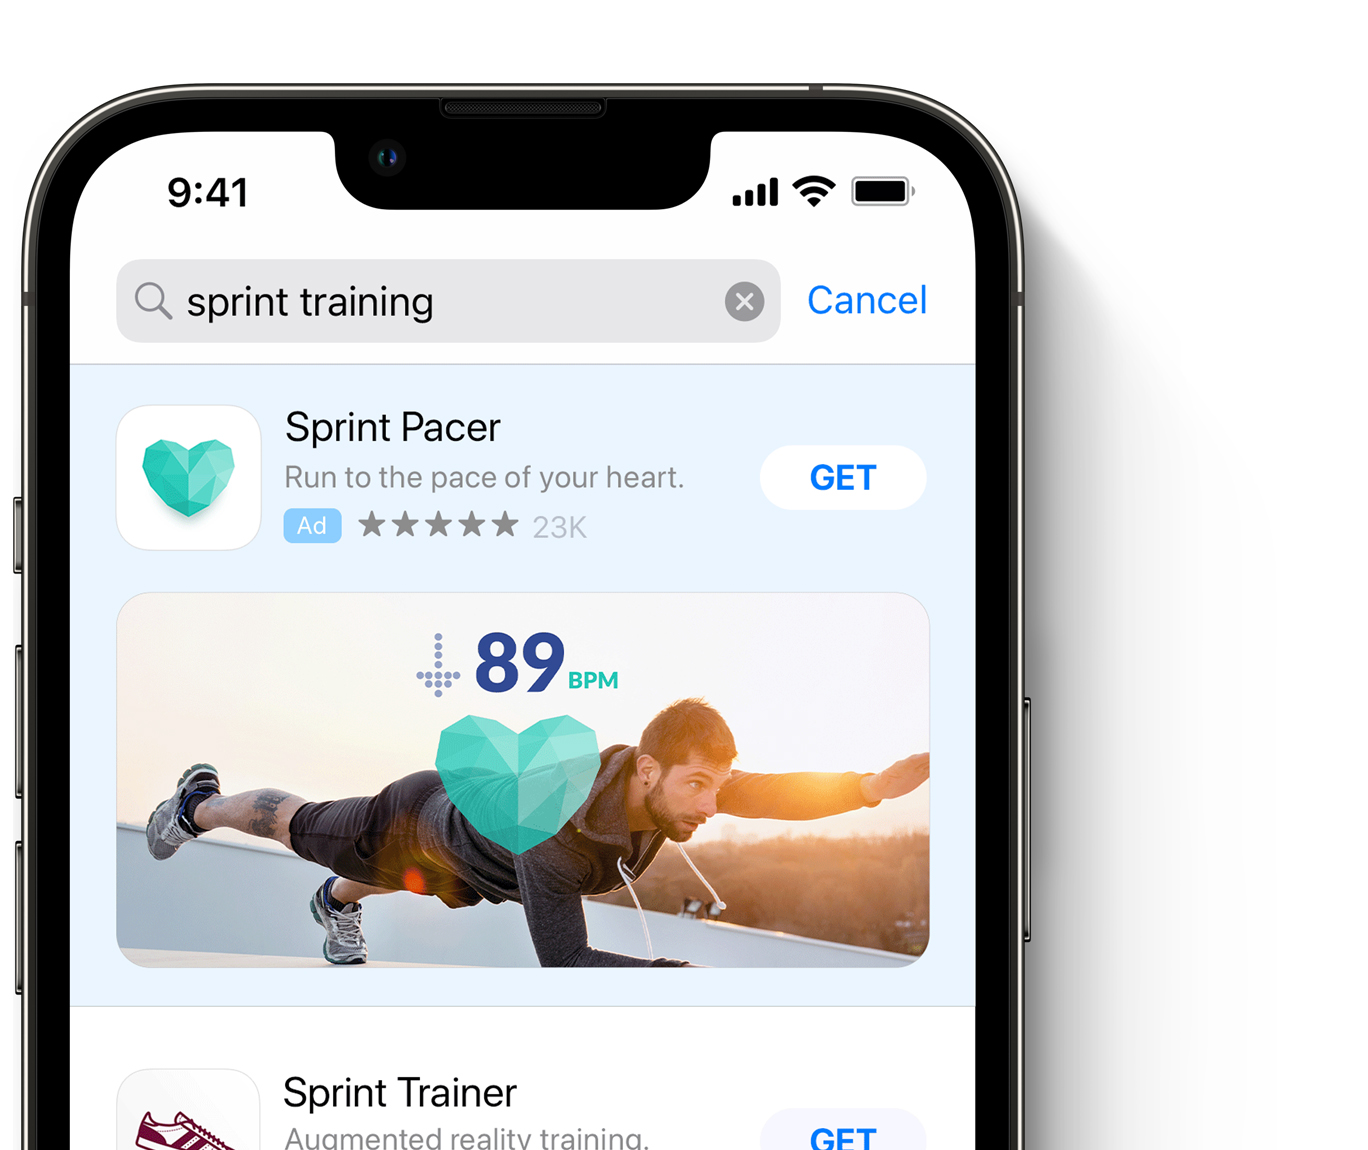 Sprint Pacer ad at top of search results